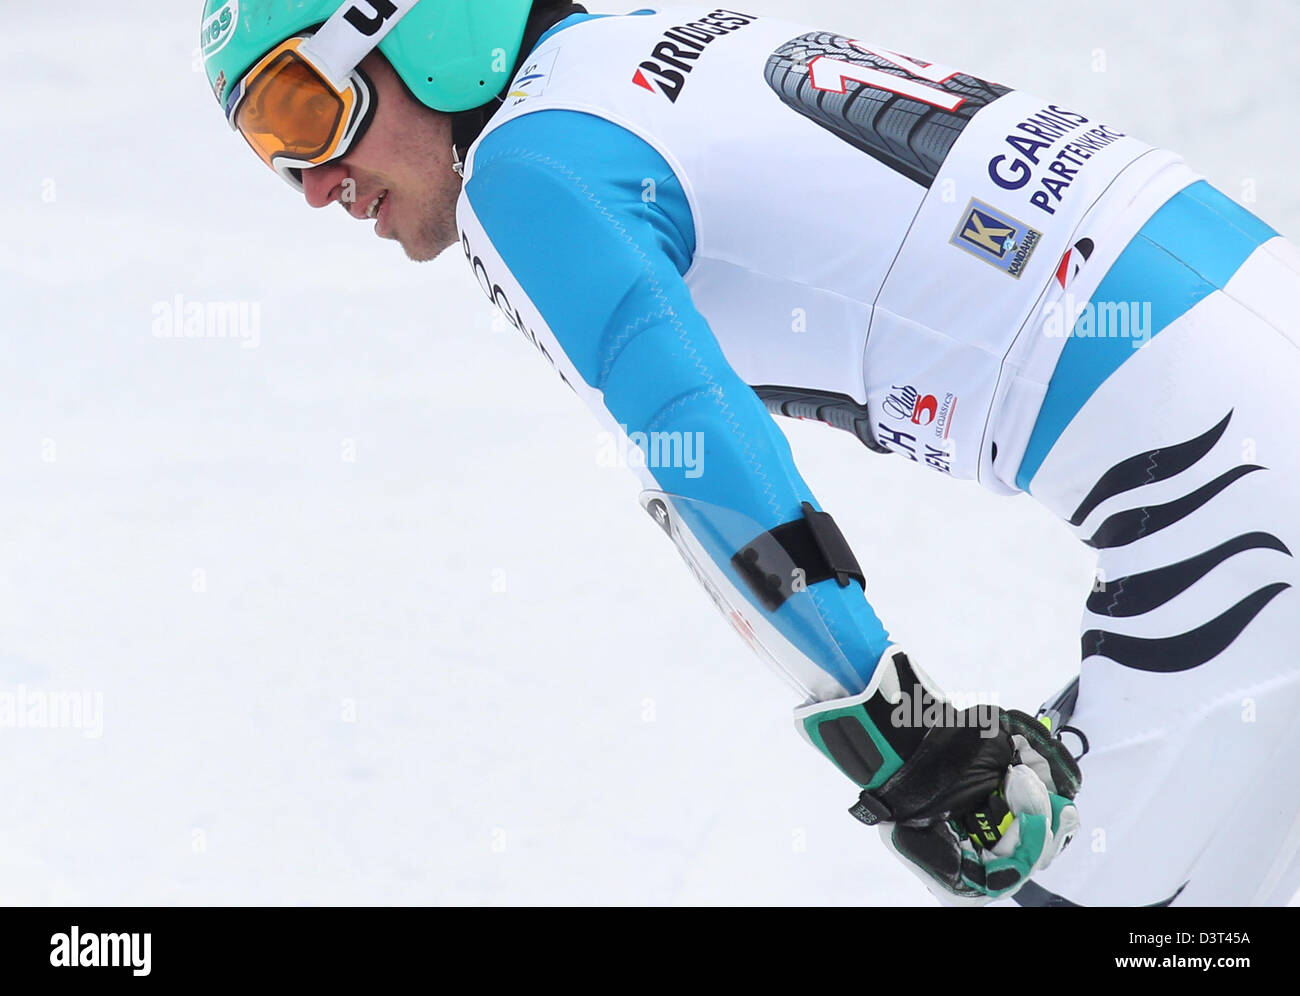 Garmisch-Partenkirchen, Germany, 24th Feb, 2013. Germany's Felix Neureuther reacts after the Men's Giant Slalom race at the Alpine Skiing World Cup in Garmisch-Partenkirchen, Germany, 24 February 2013. Photo: KARL-JOSEF HILDENBRAND/dpa/Alamy Live News Stock Photo